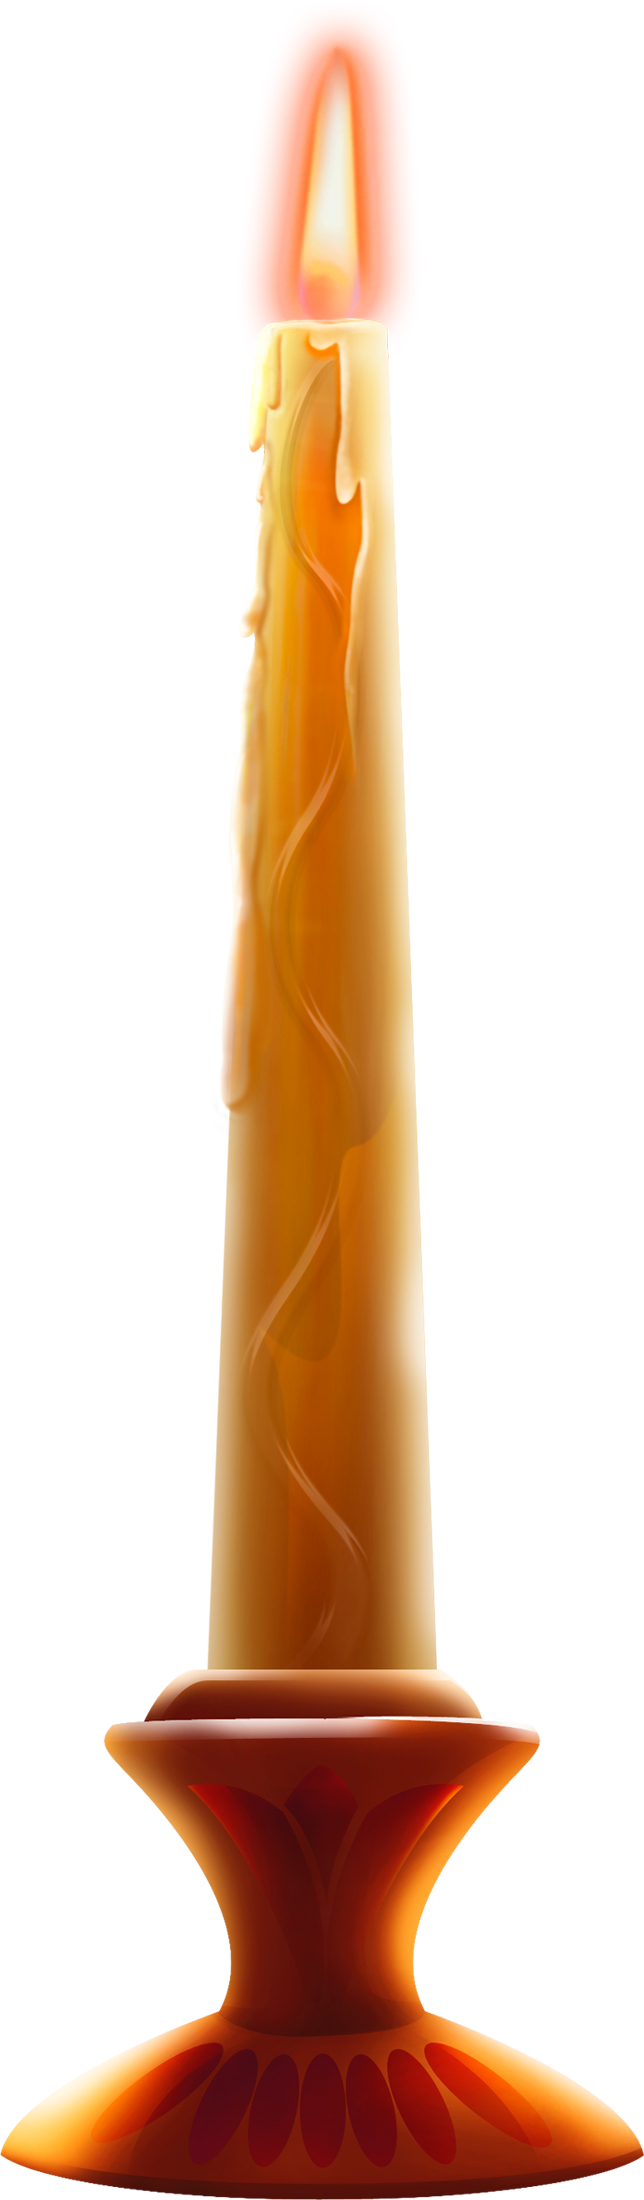 Candle Png Image - Candle, Transparent background PNG HD thumbnail